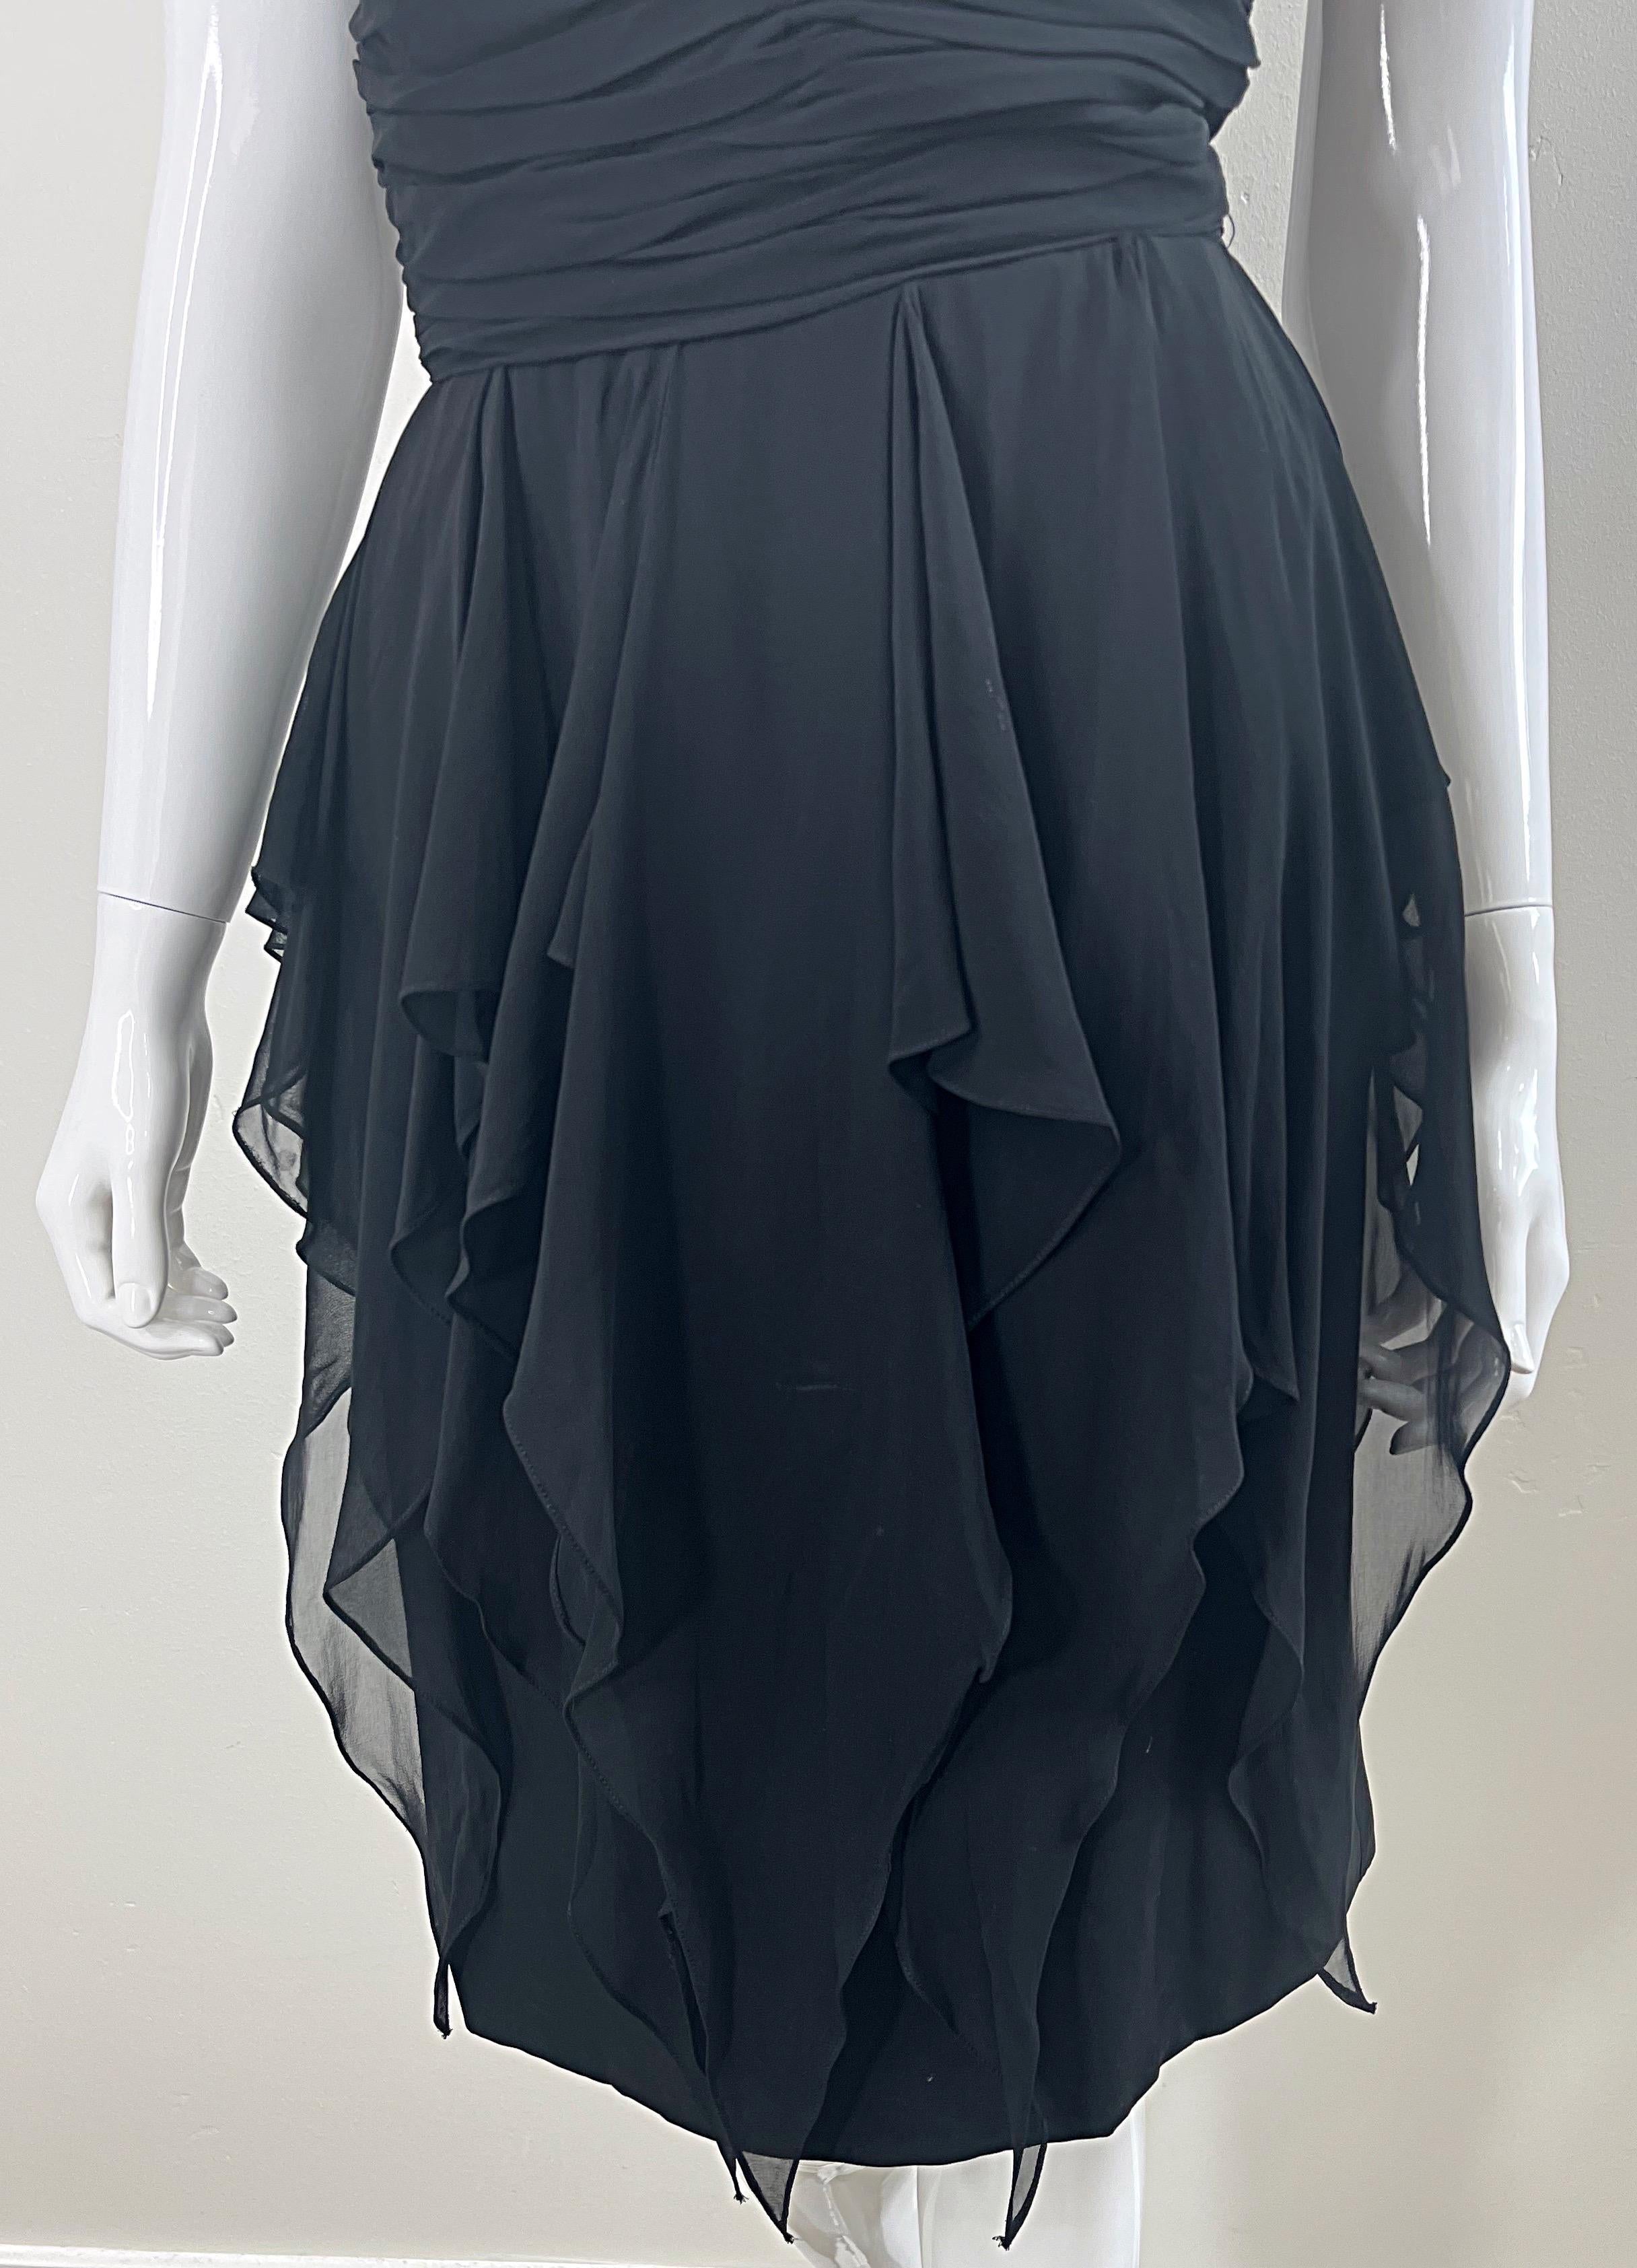 1950s Demi Couture Black Chiffon Handkerchief Waterfall Panel Vintage 50s Dress For Sale 3